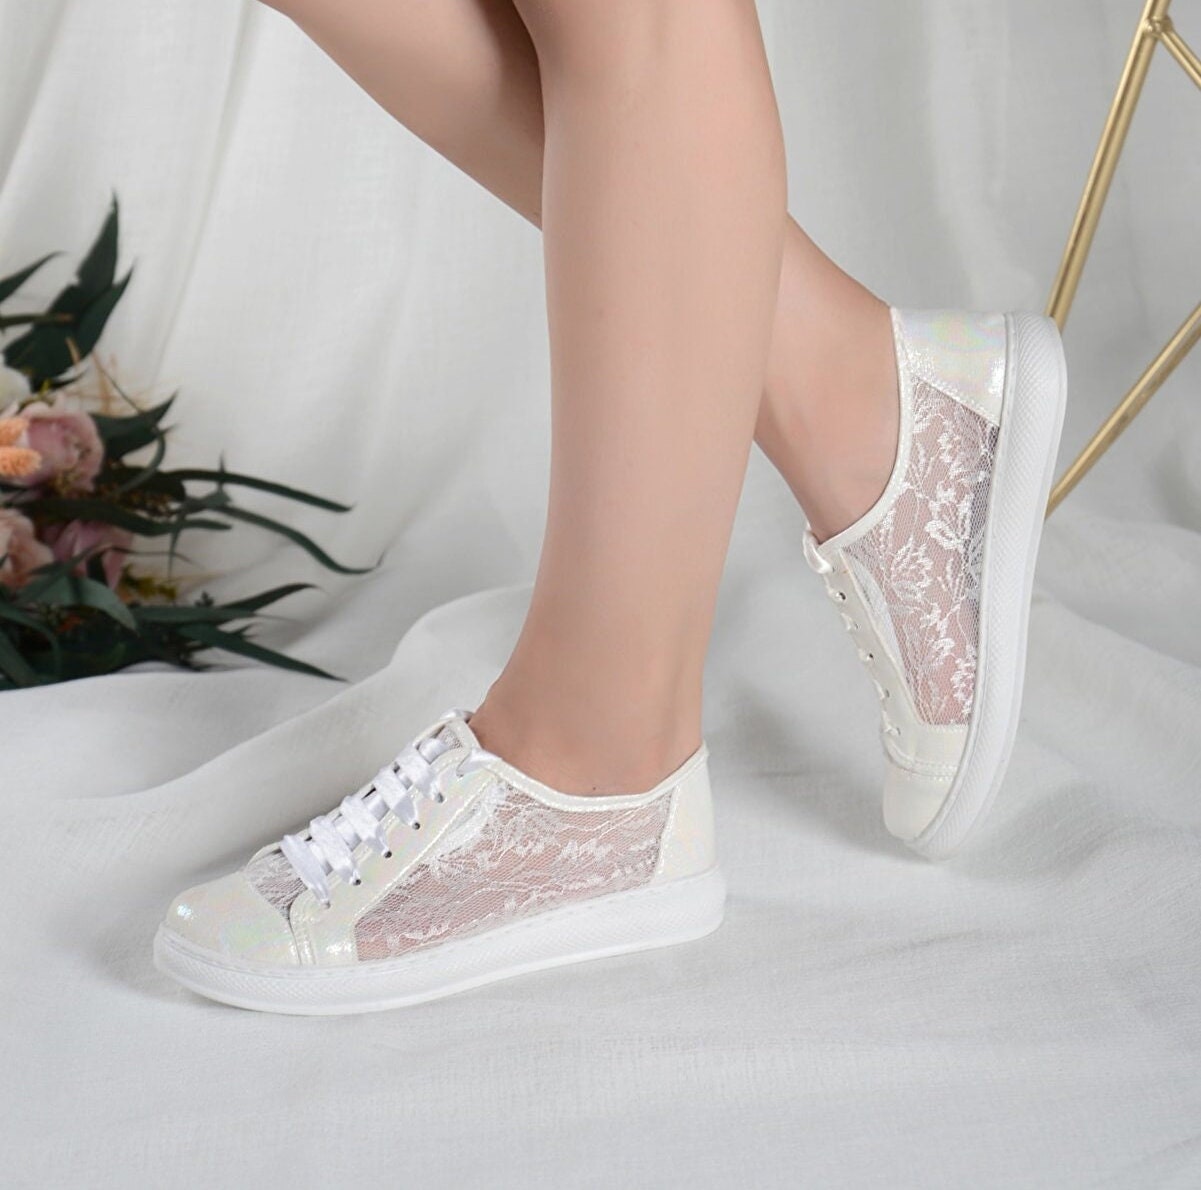 Lace Sneakers: Adding a Touch of Sophistication